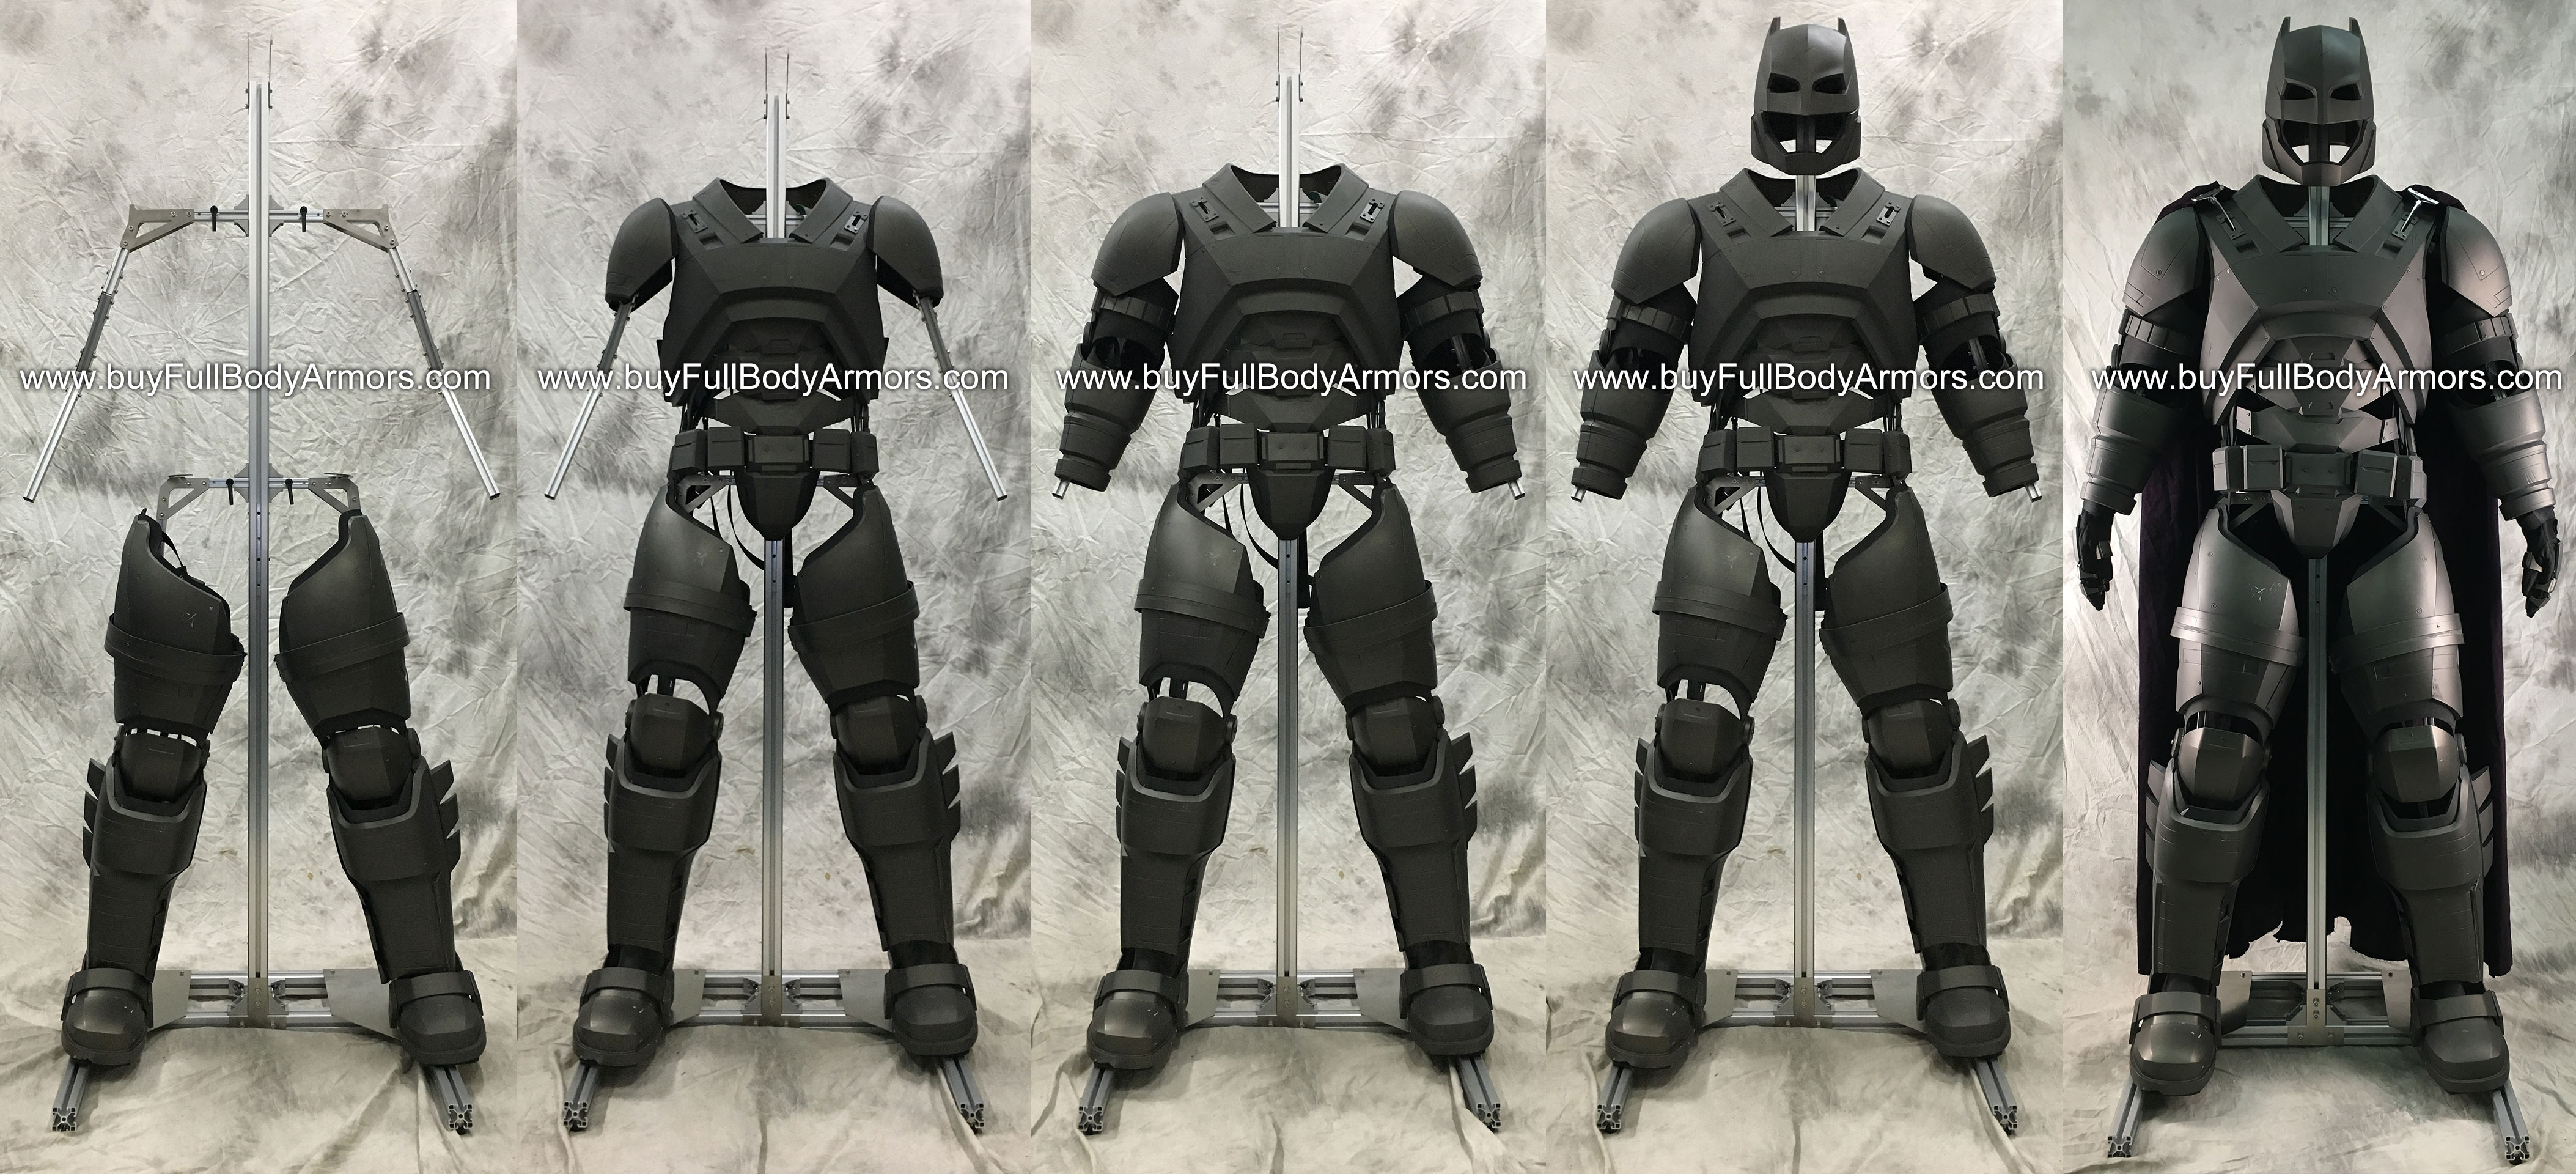 wearable armored batsuit batman suit armor on stand 1